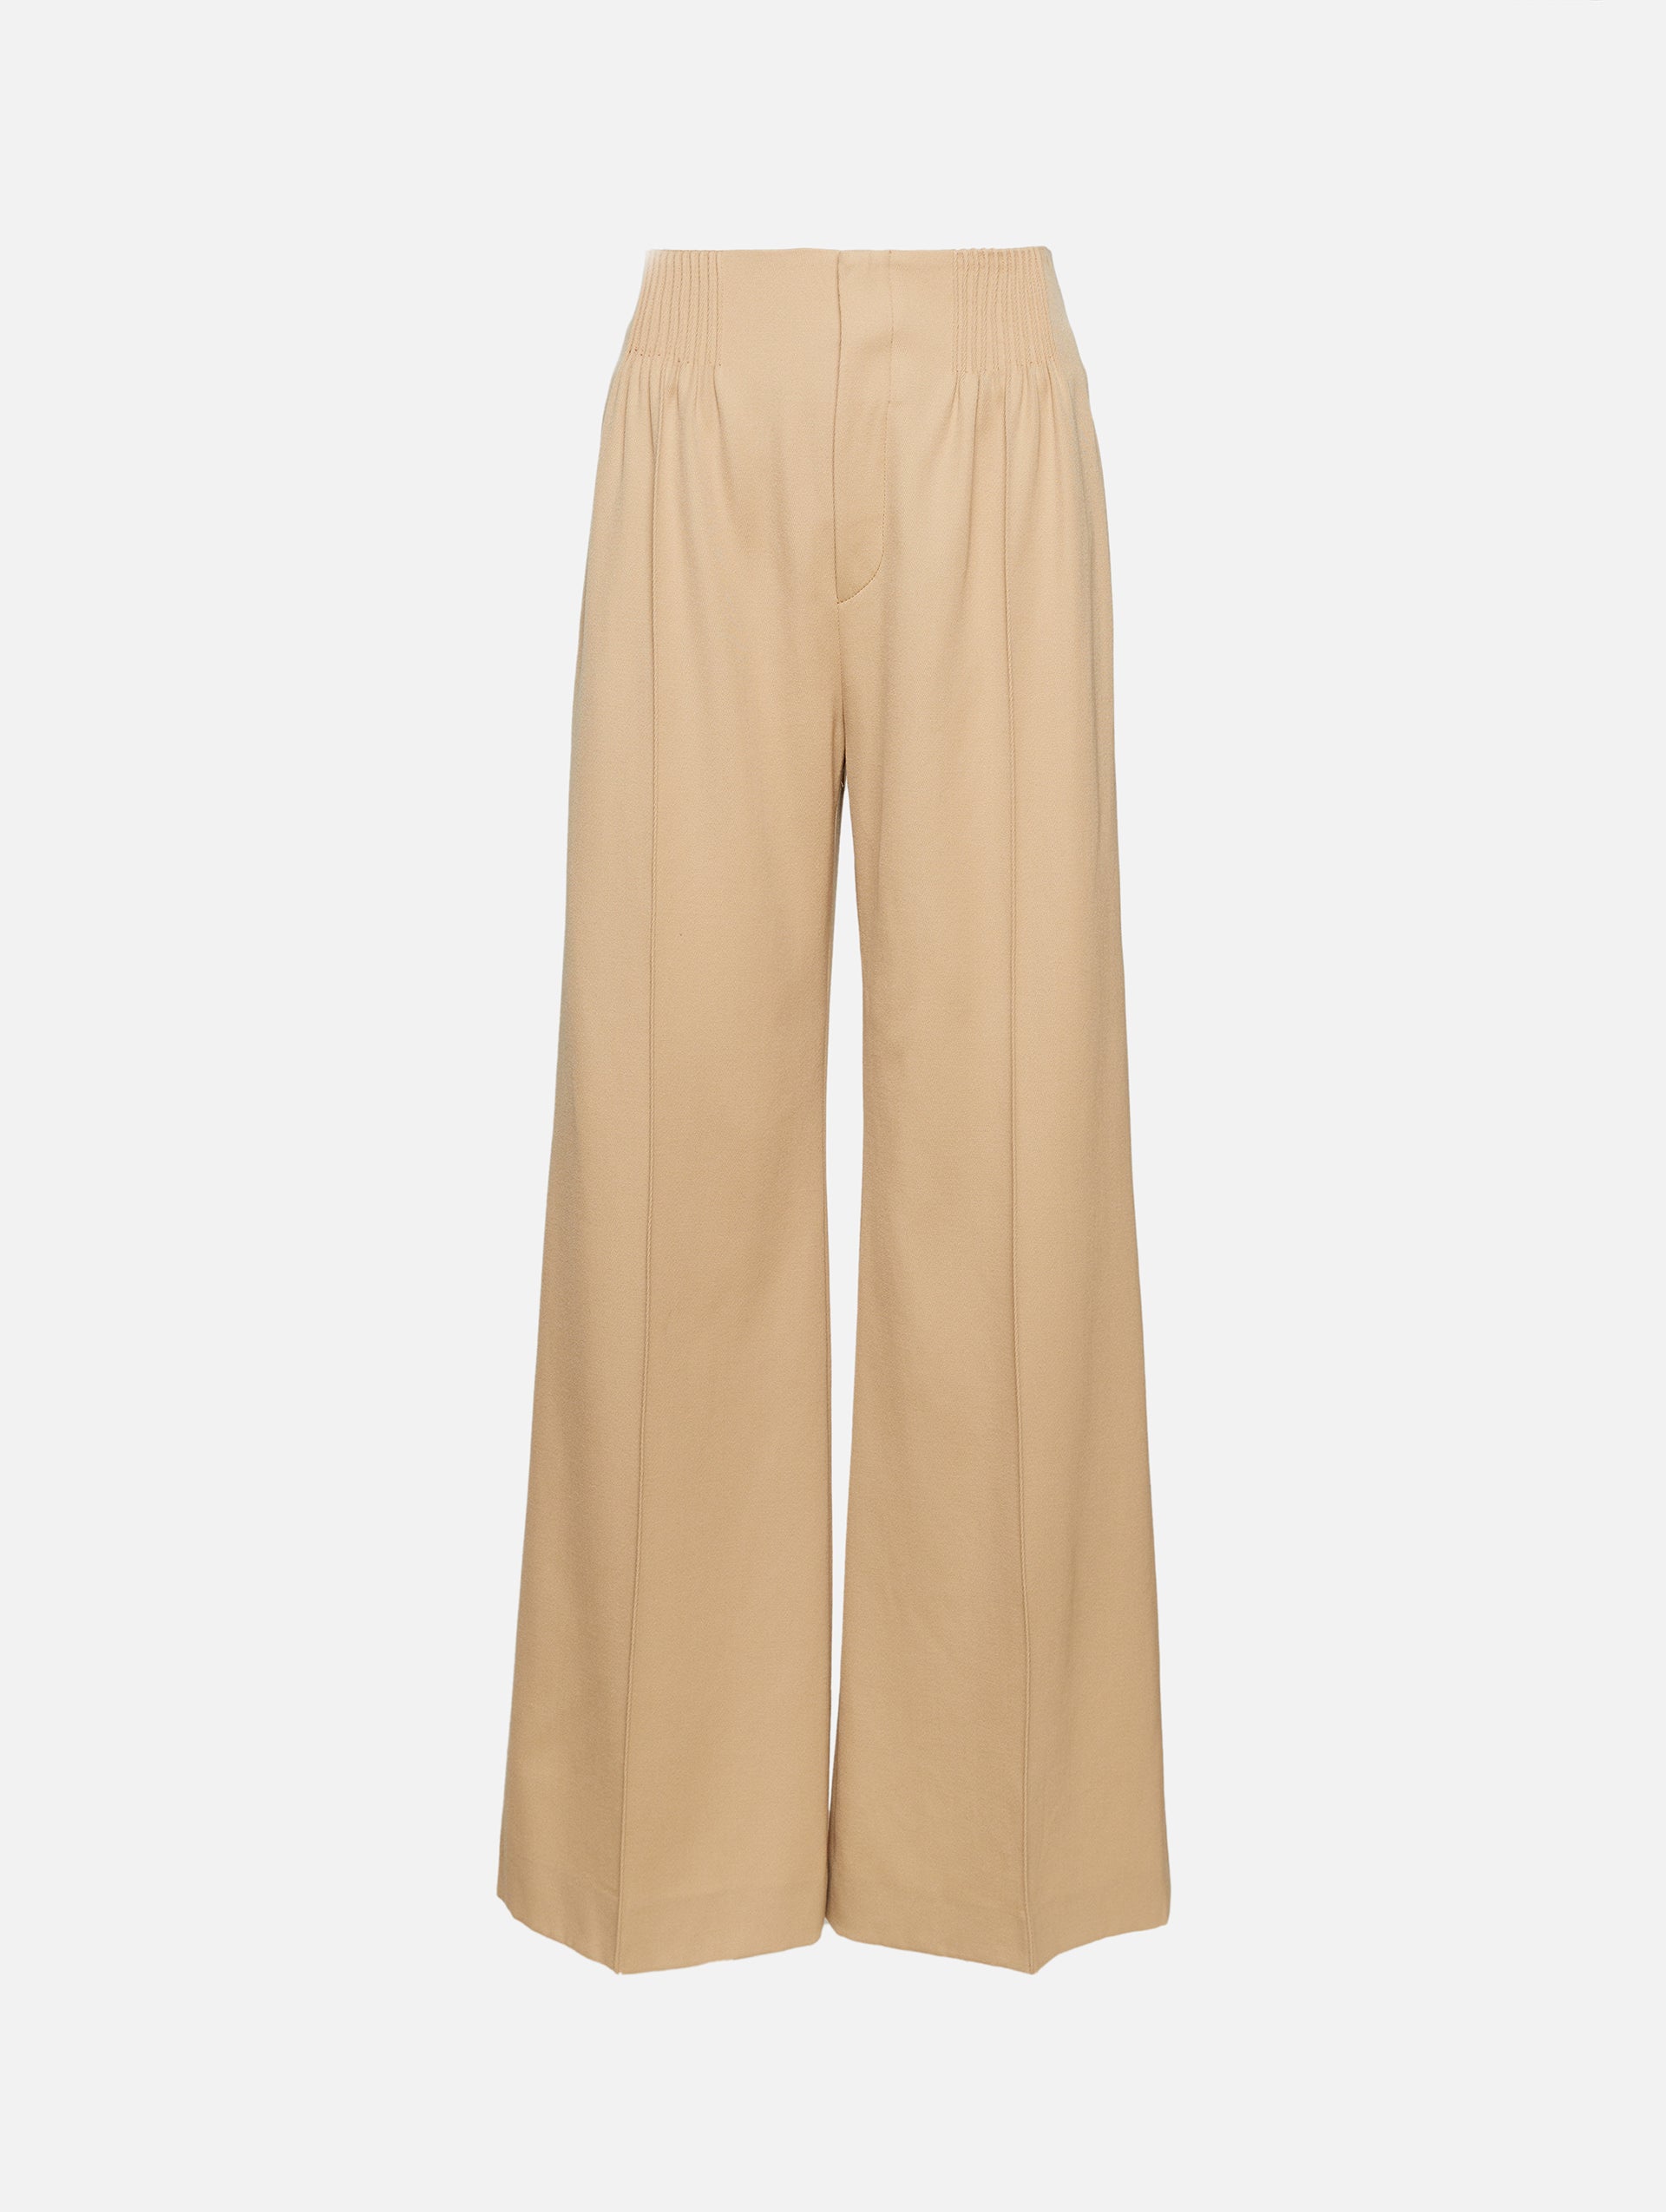 Trousers | Shop Women's Designer Pants and Trousers | The UNDONE